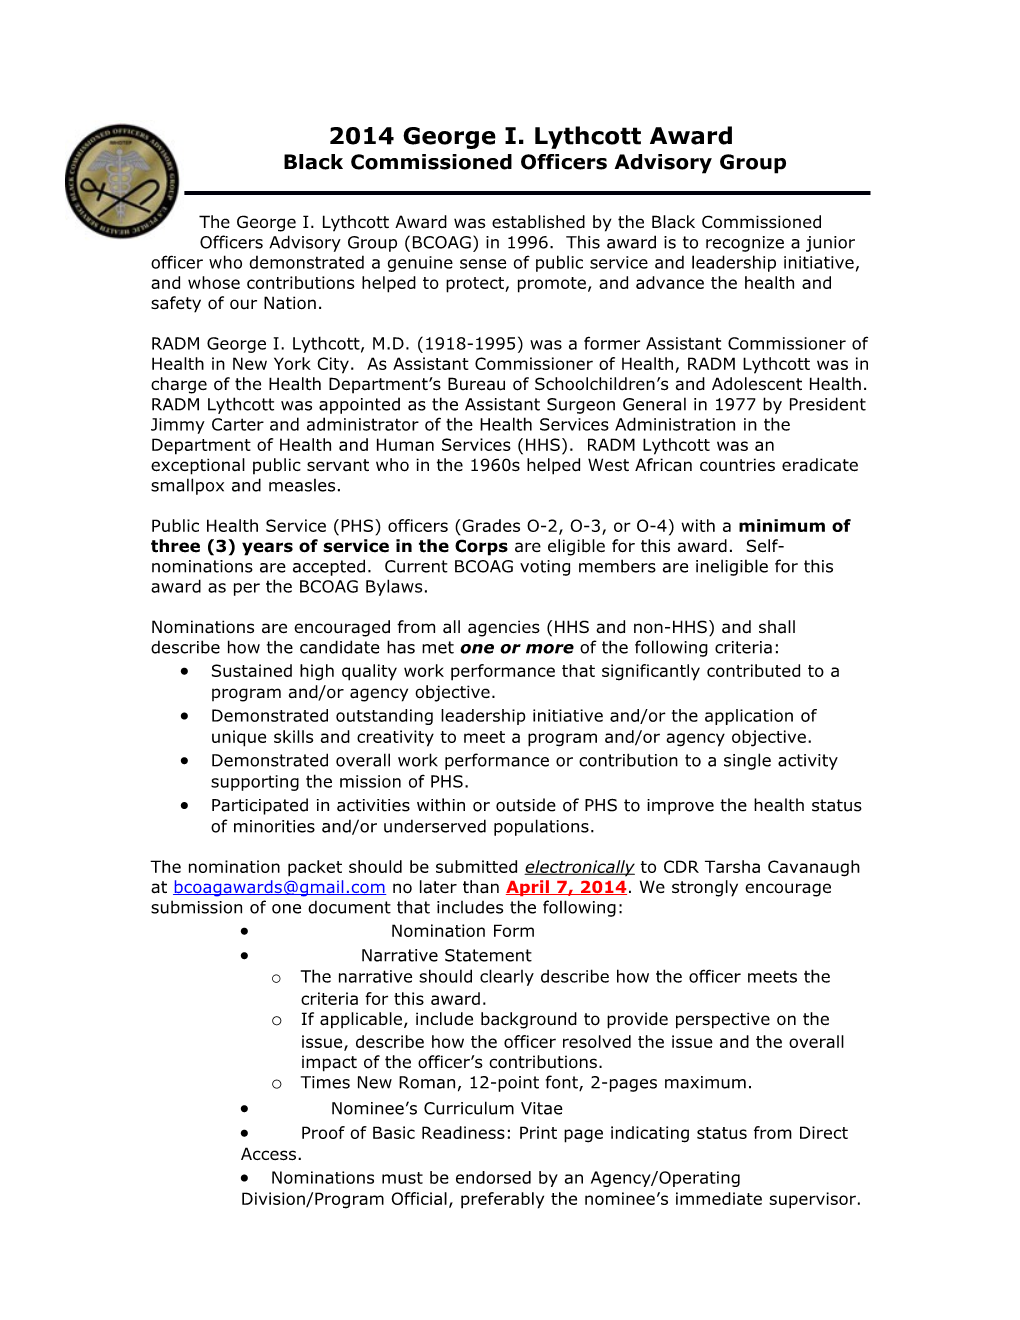 Black Commissioned Officers Advisory Group